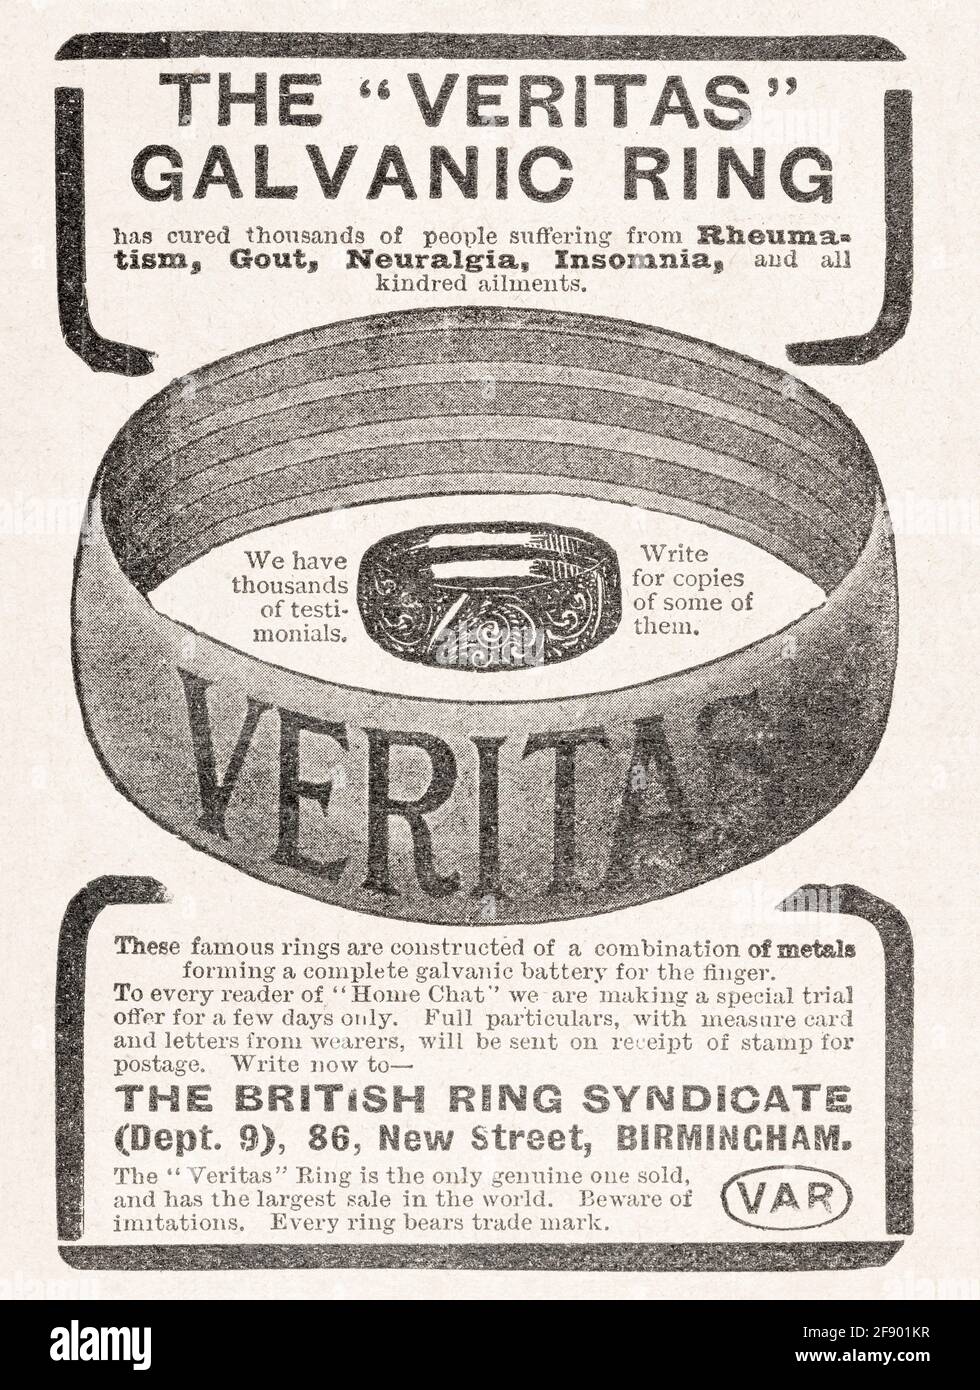 Old Victorian magazine Veritas ring anti-rheumatism advert from 1907 - pre advertising standards. History of medical advertising, alternative cures. Stock Photo